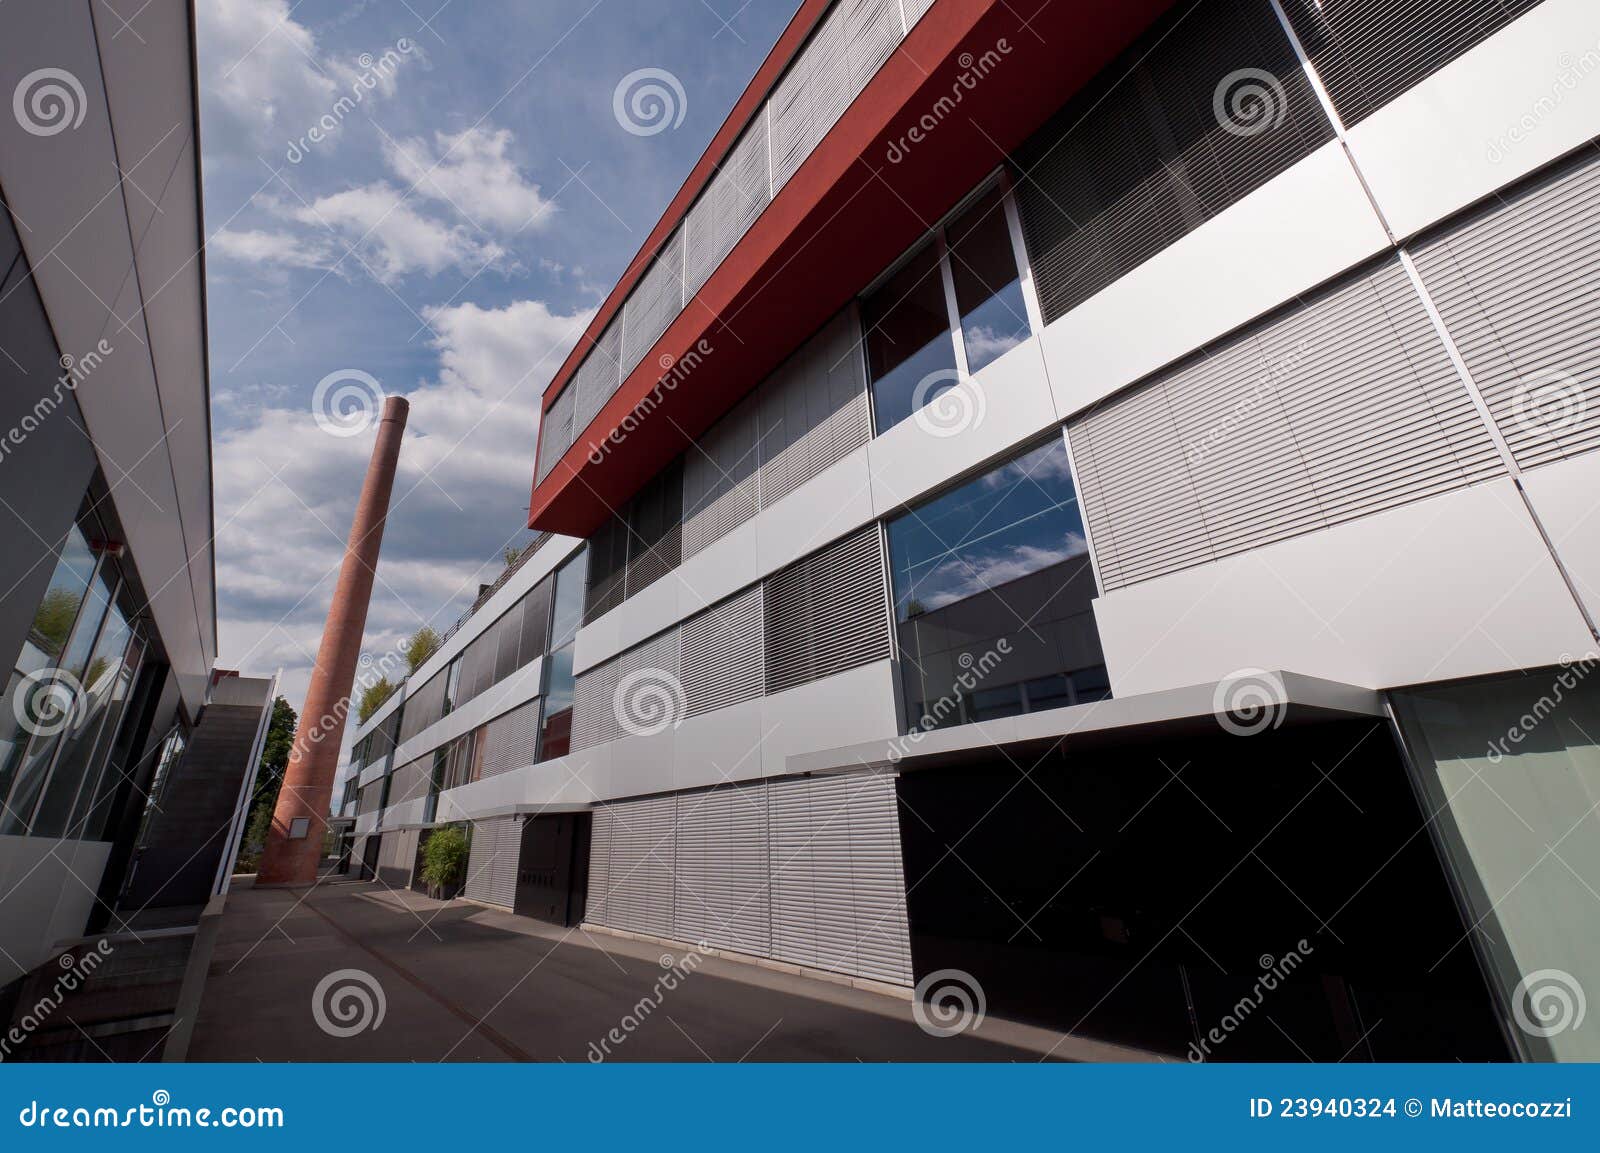 commercial buildings and chimney